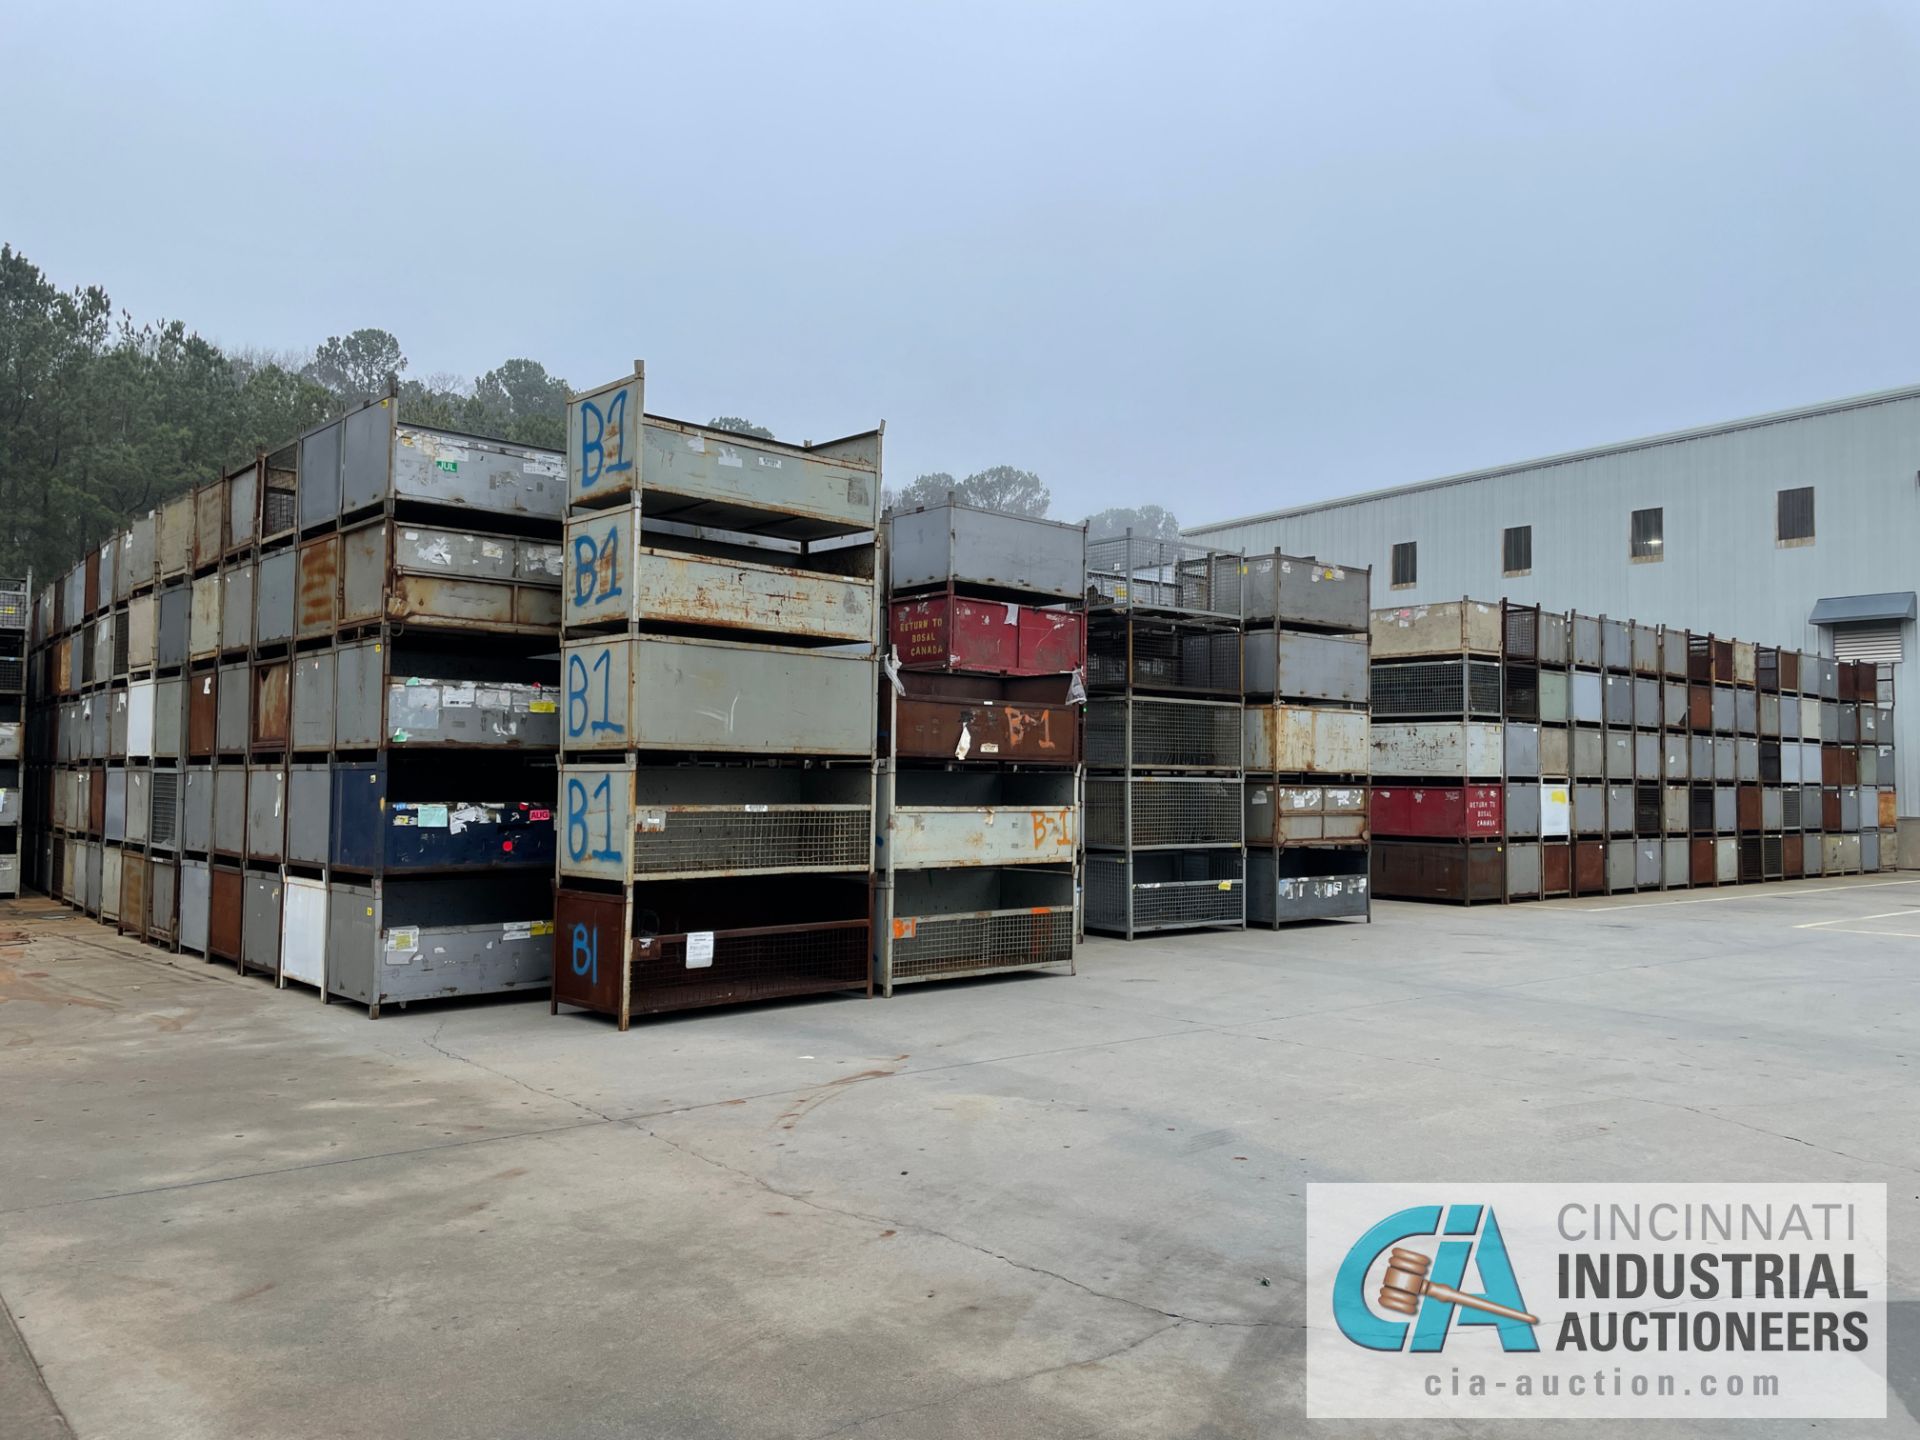 40" FRONT TO BACK X 80" LEFT TO RIGHT X 39" HIGH STACKABLE STEEL CONTAINERS - SEE LOT NO. 584A FOR - Image 2 of 5